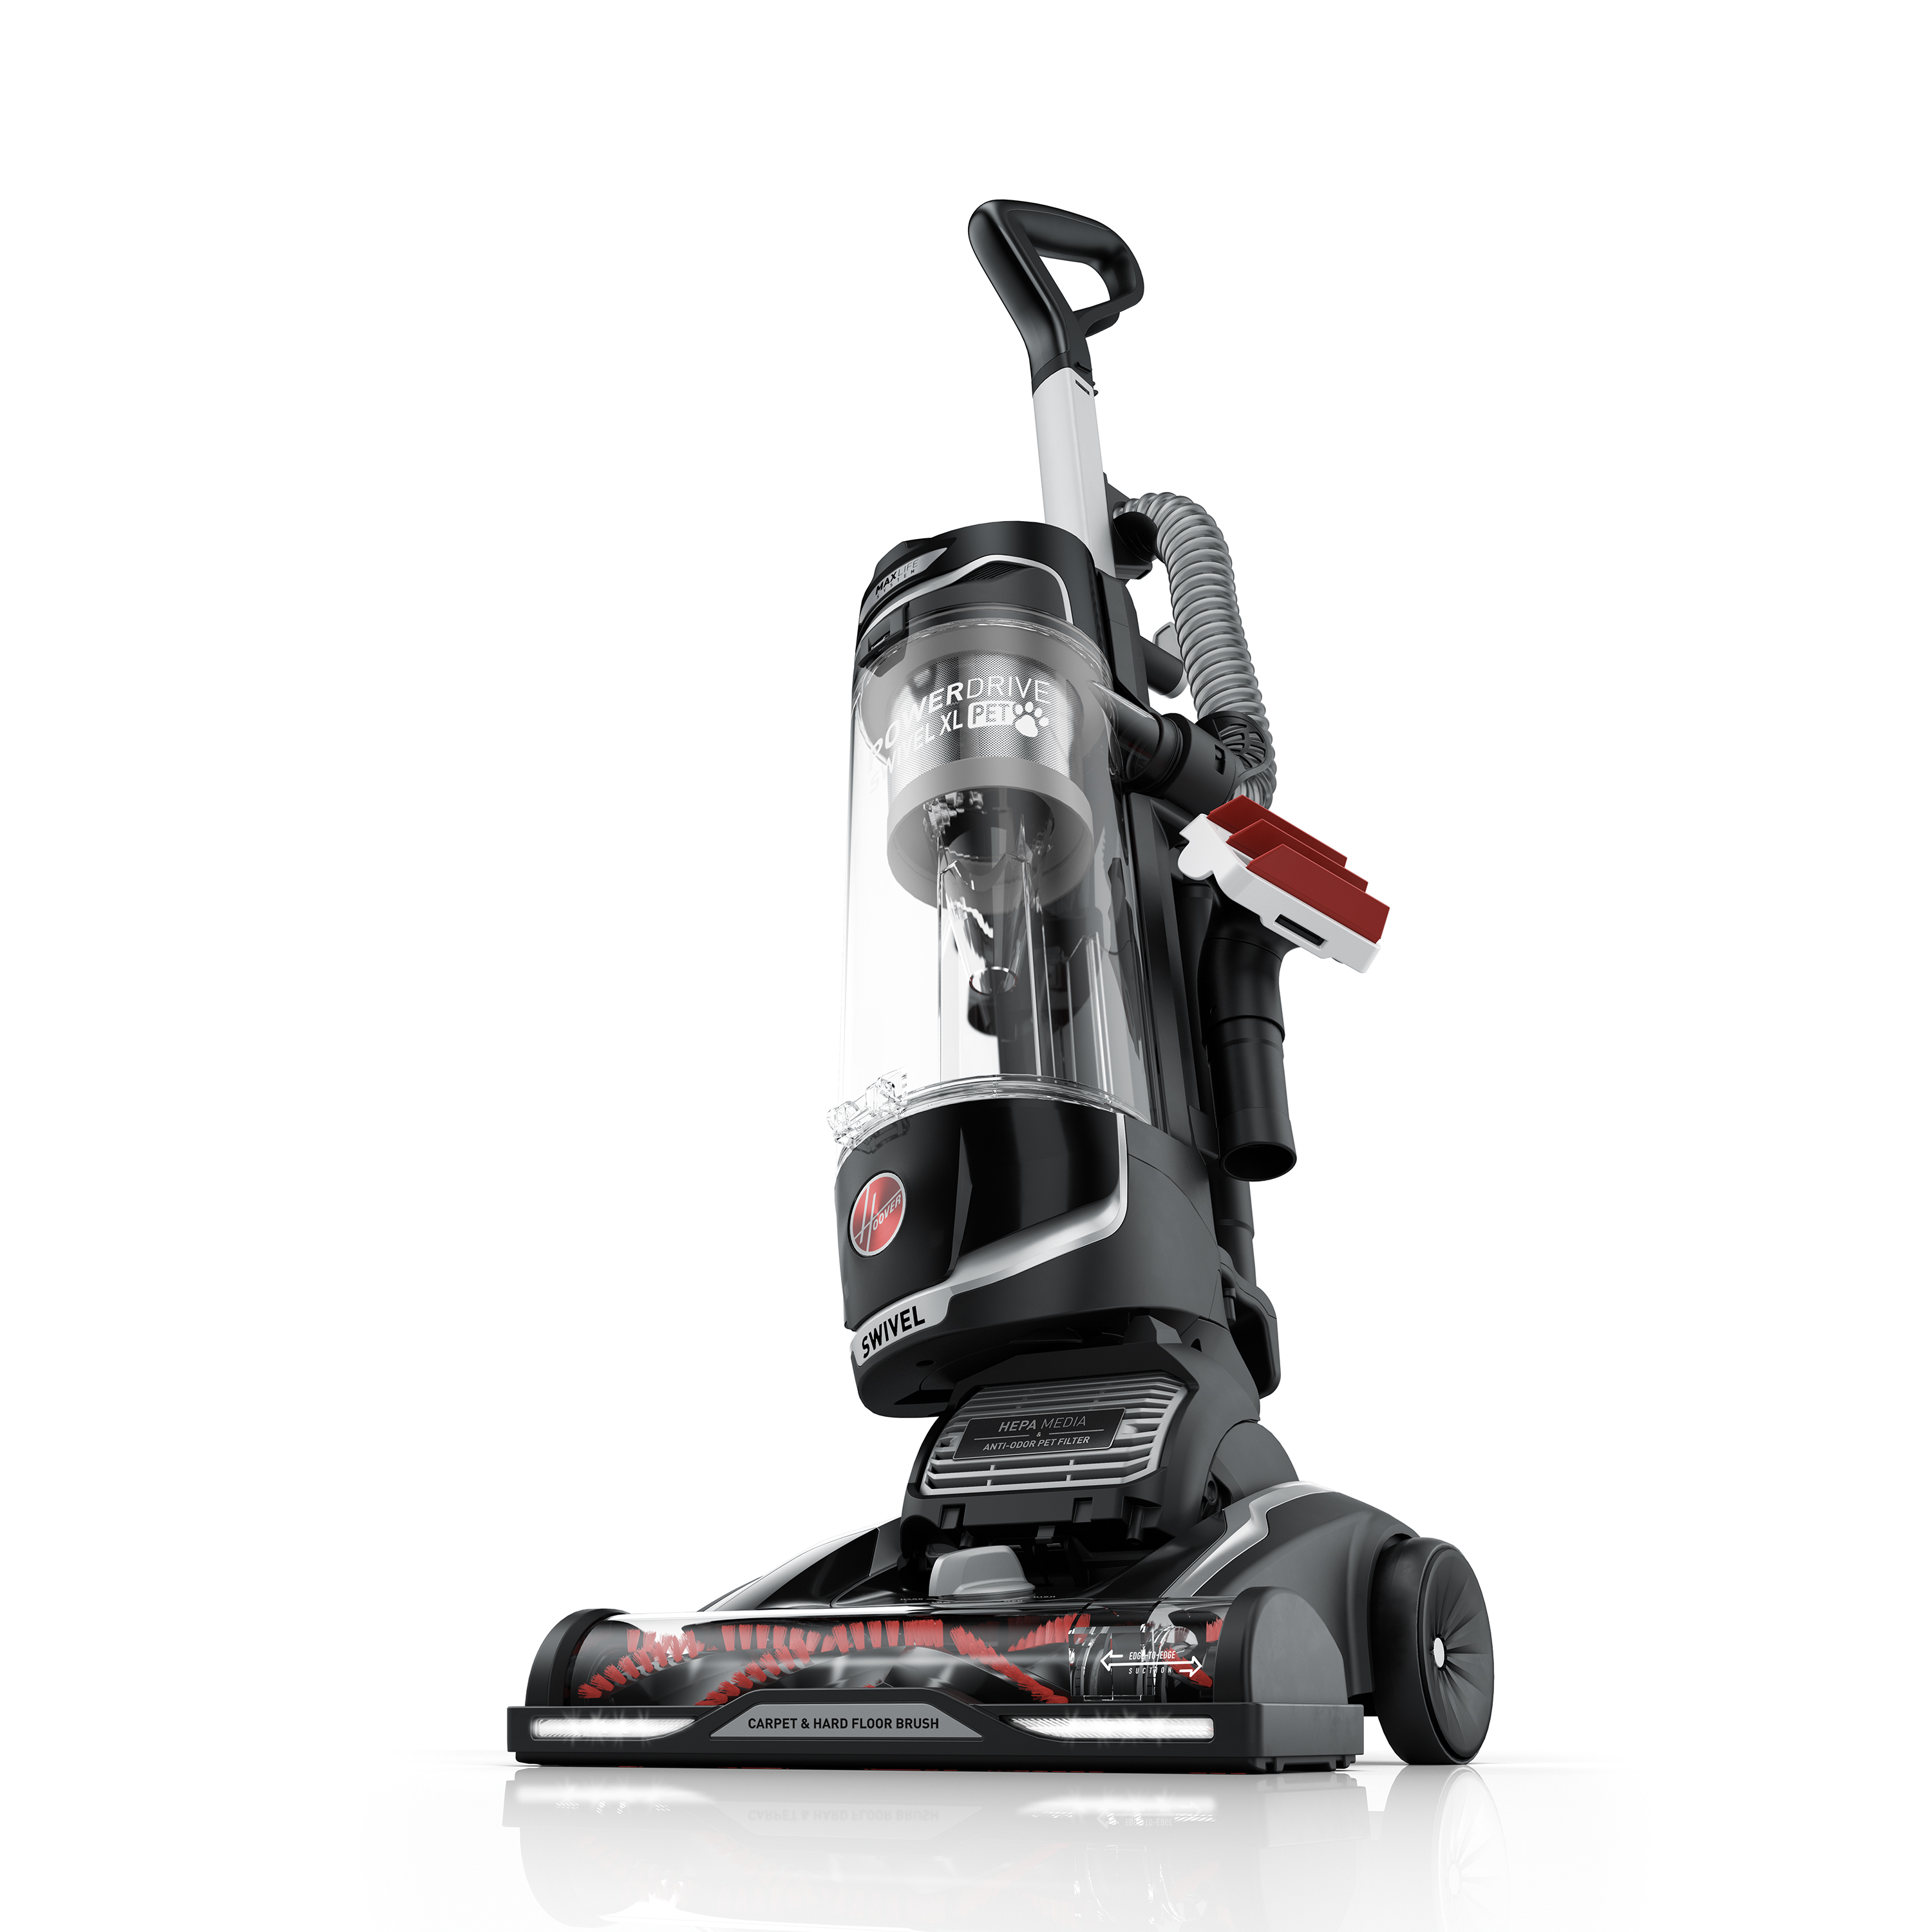 Hoover MAXLife Power Drive Swivel XL Pet Bagless Upright Vacuum Cleaner with HEPA Media Filtration, UH75210, New - image 3 of 9